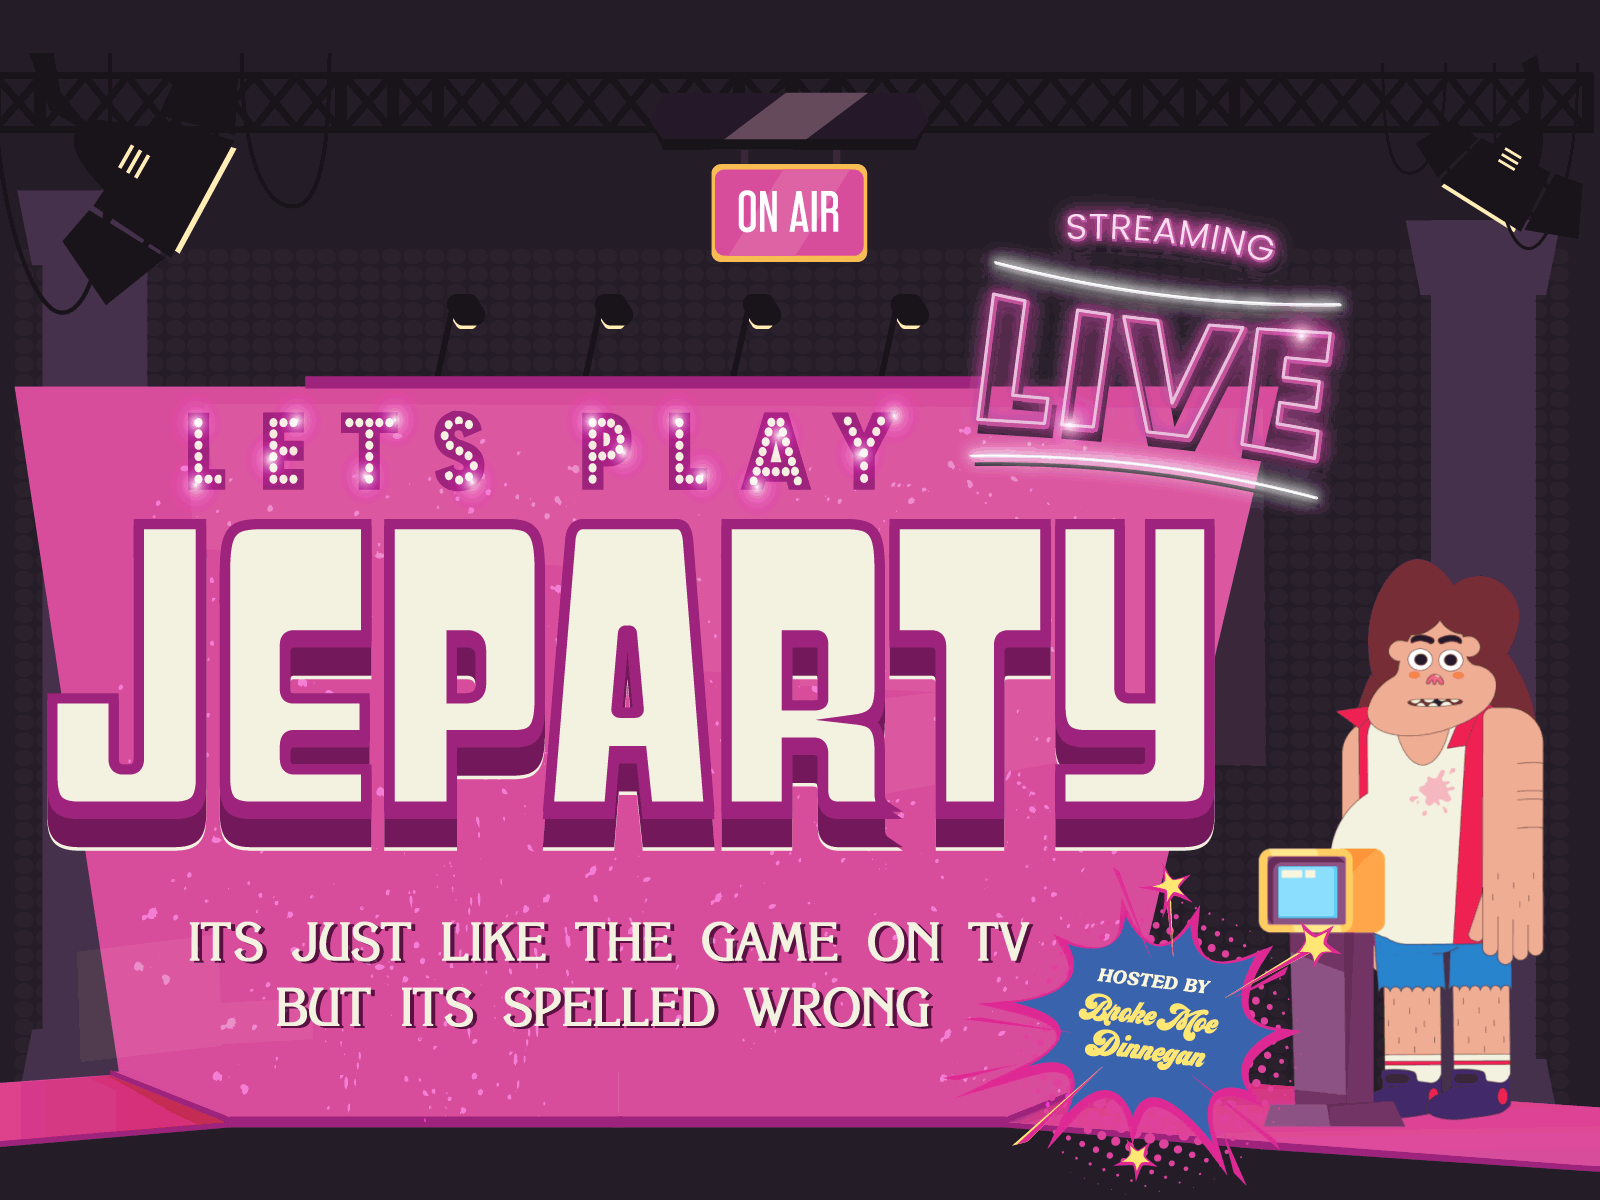 Jeparty Live animation character animator jeopardy streaming